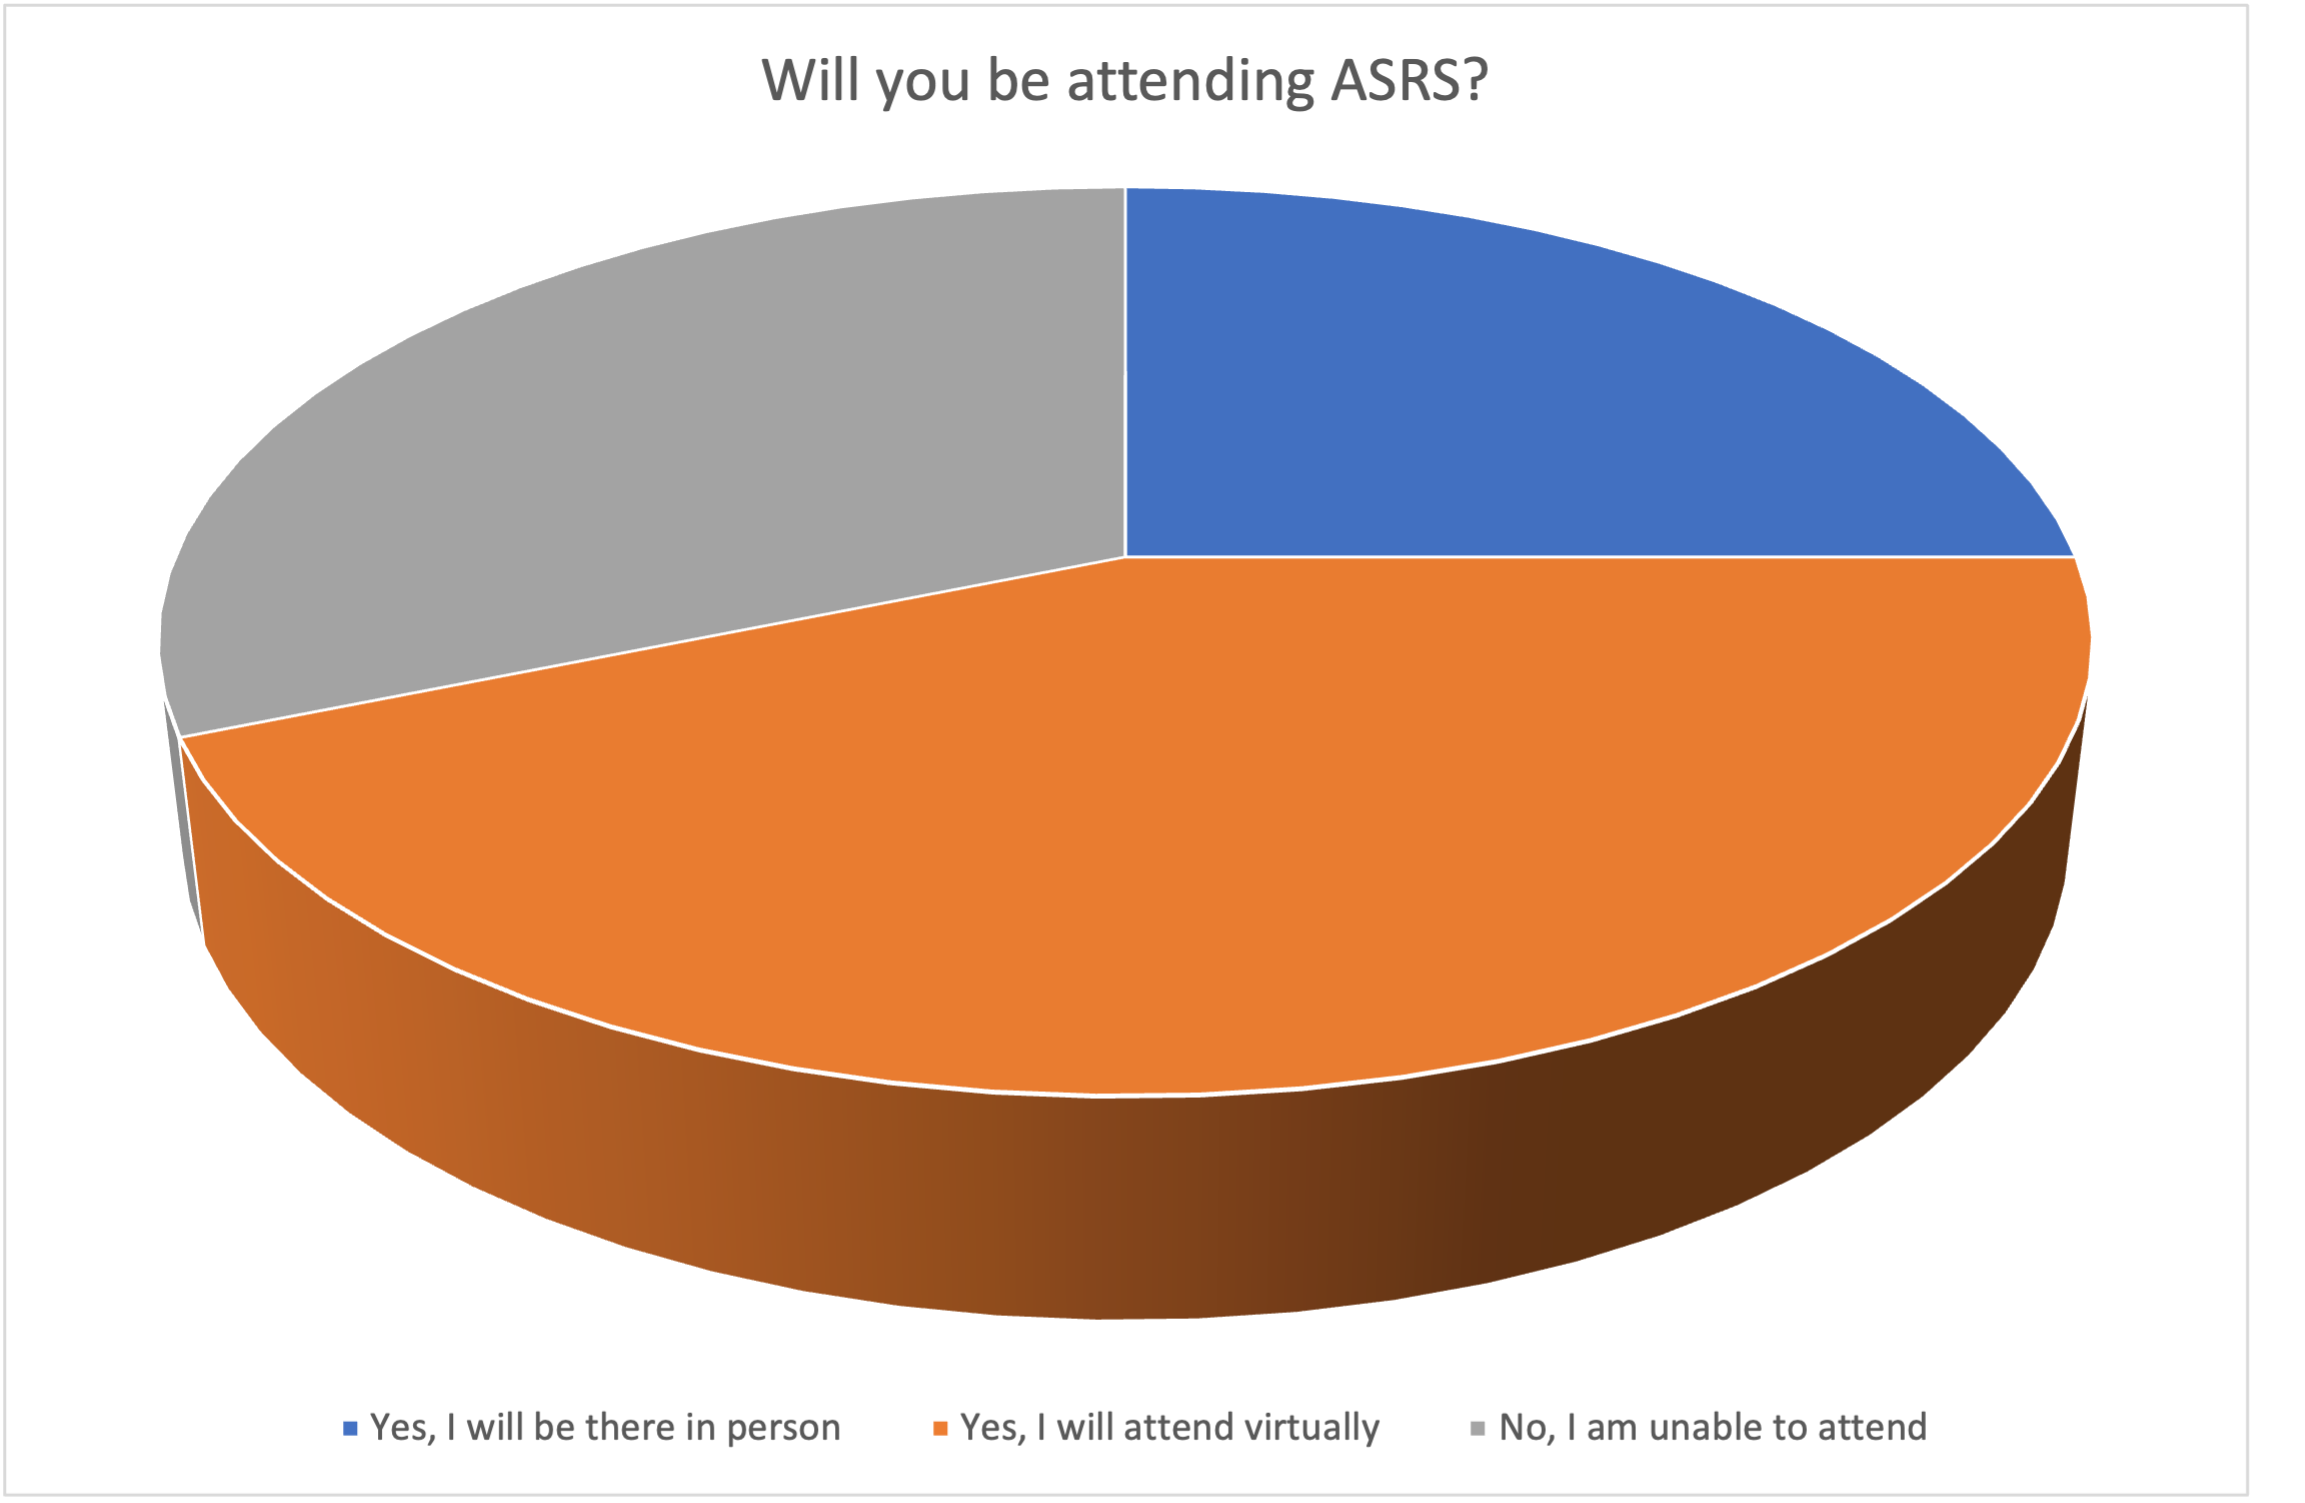 Poll results: Will you be attending ASRS 39th Annual Scientific Meeting?